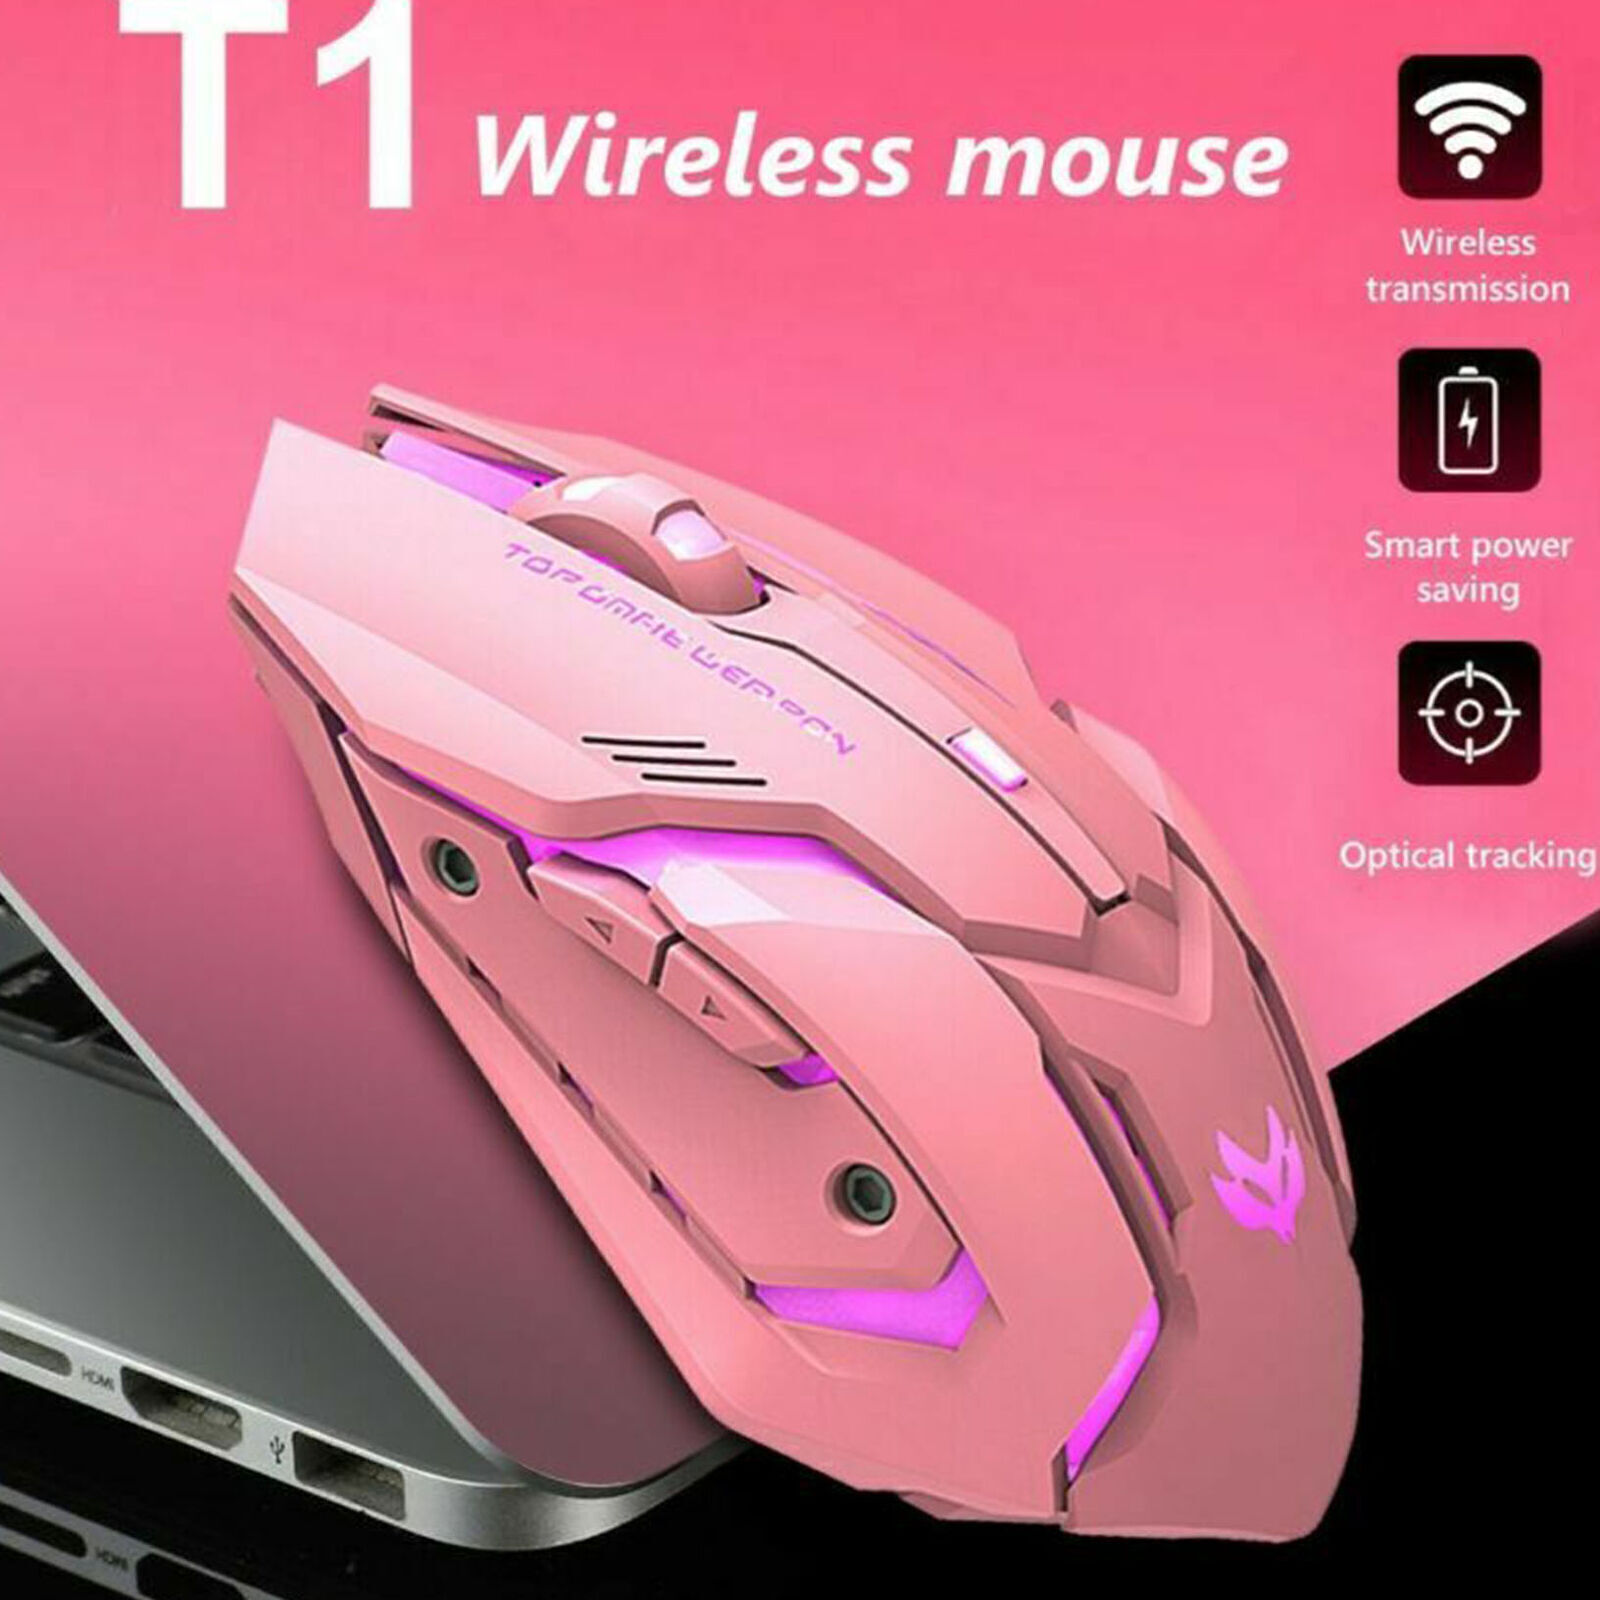 2.4GHz Wireless Optical Mouse Mice & USB Receiver 1600DPI For PC Laptop Computer